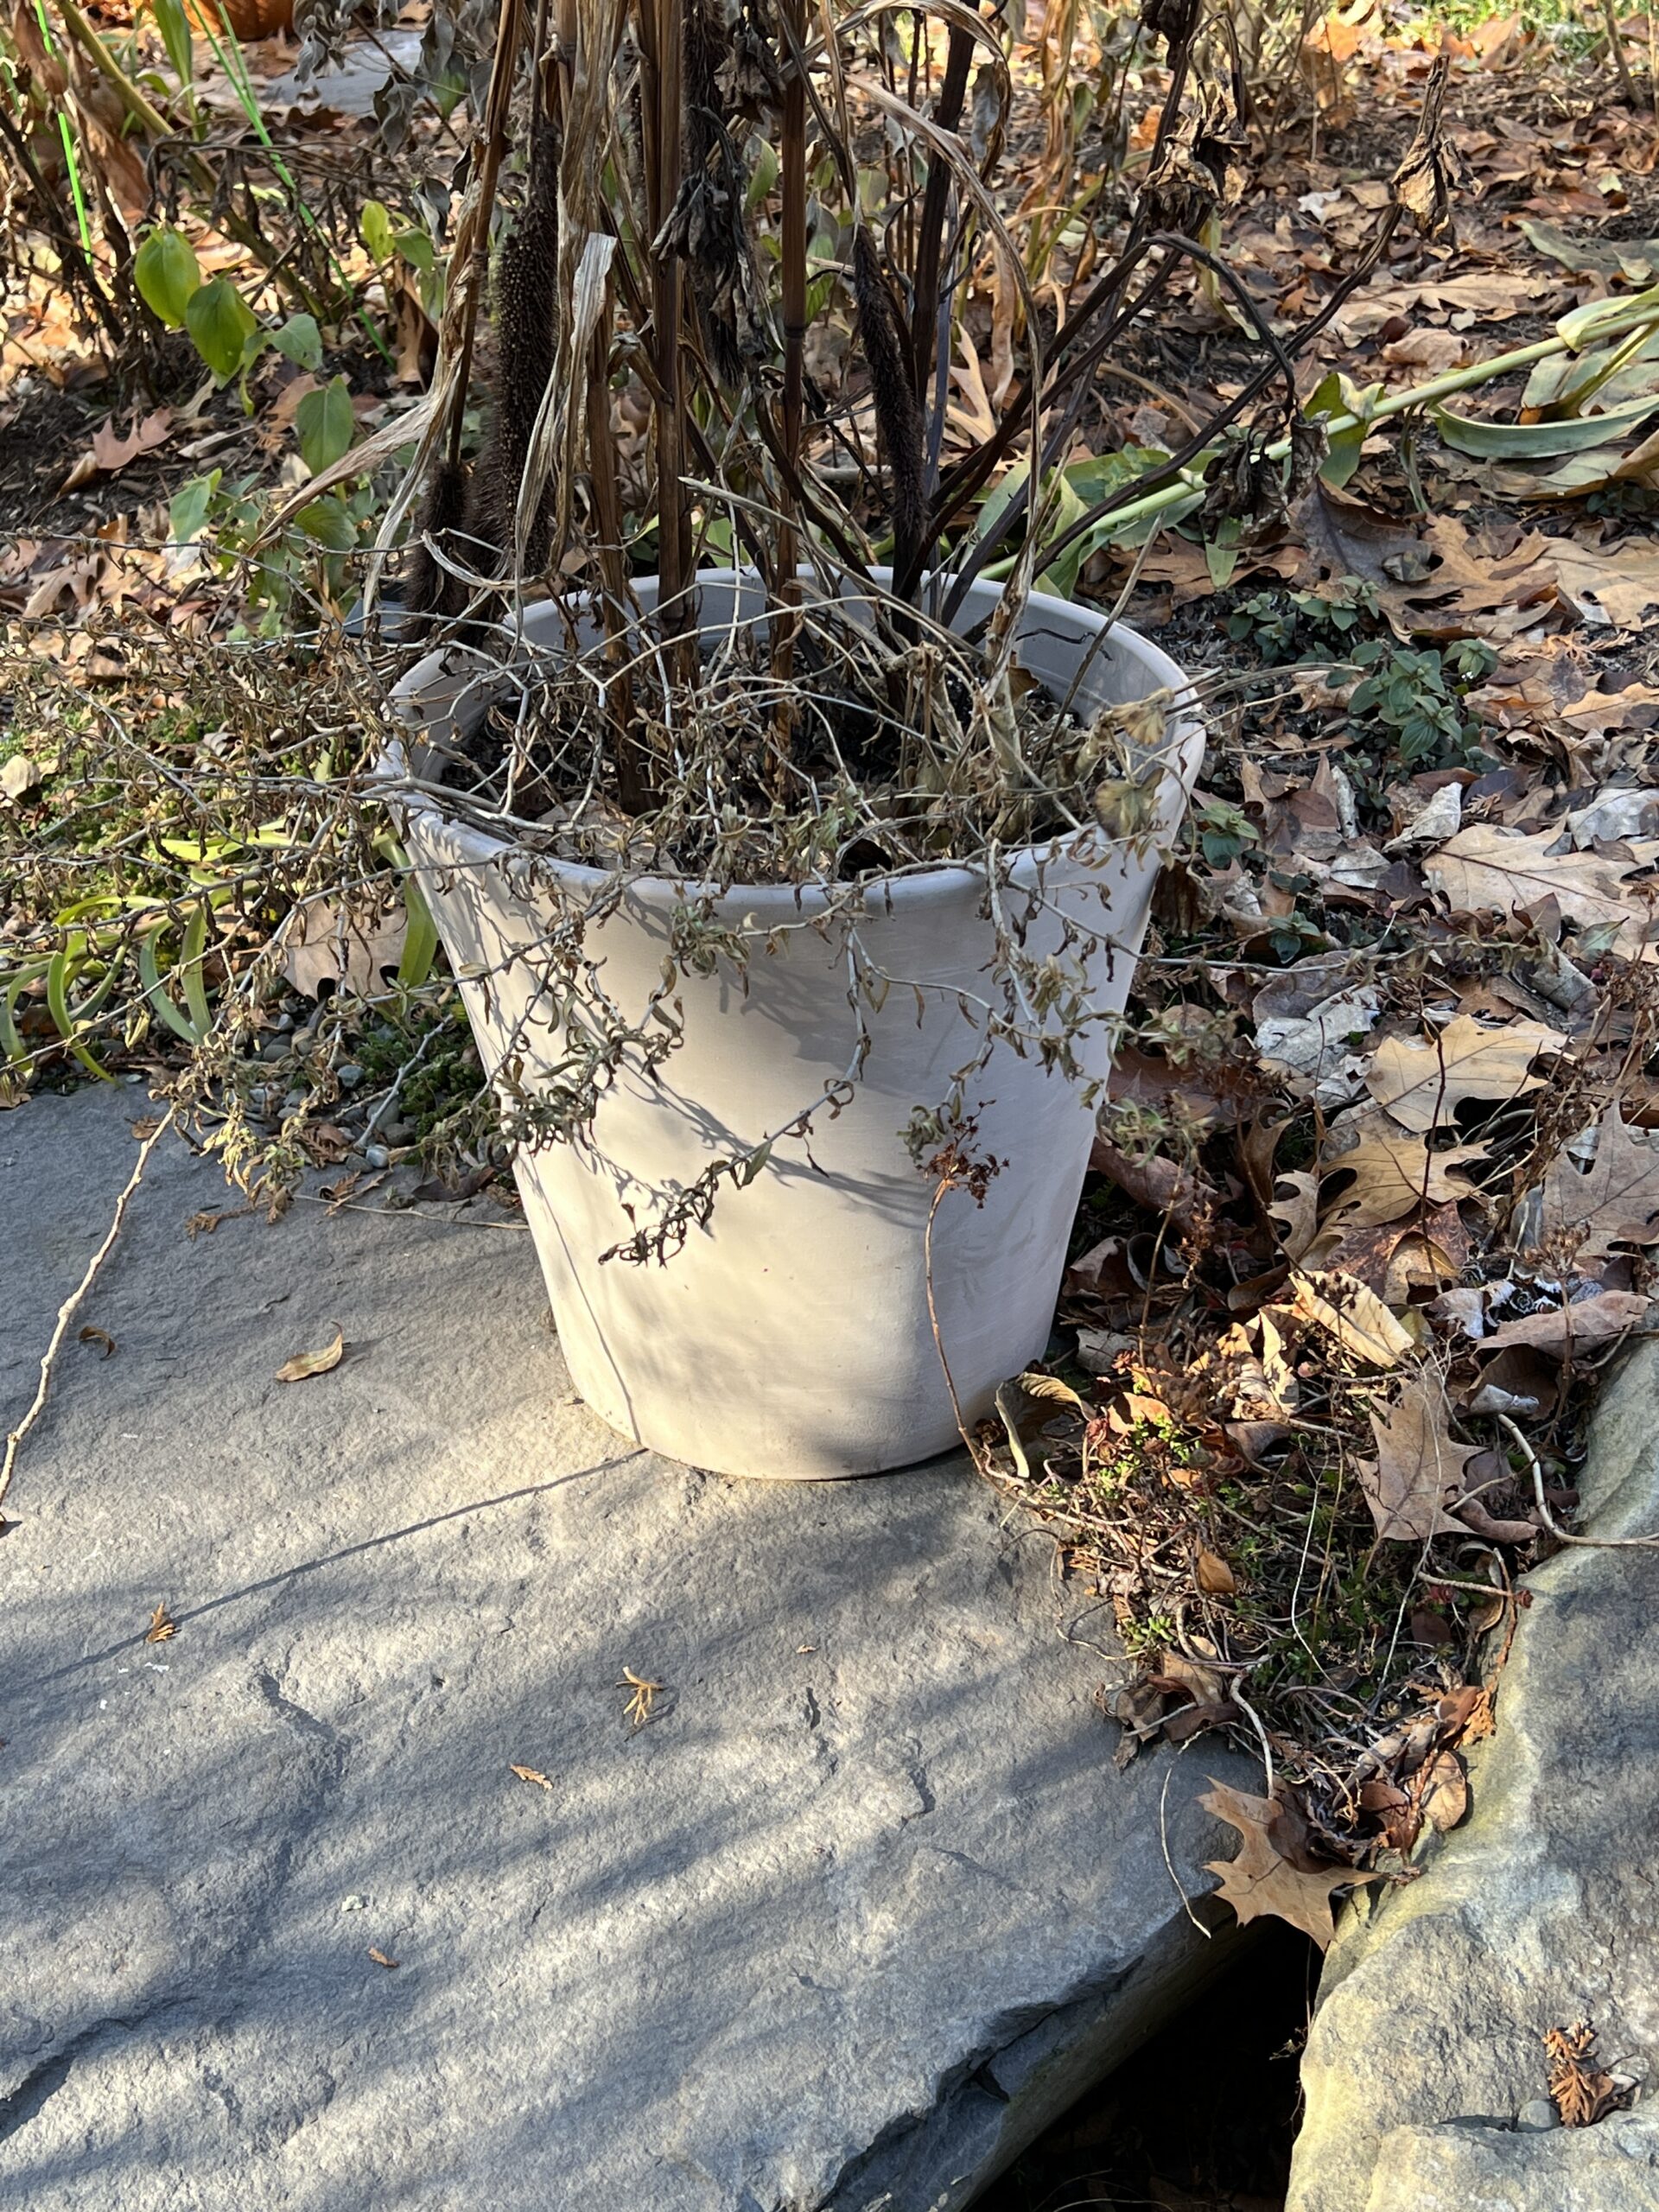 This natural clay pot will not survive the winter. It’s full of soil and one very cold night will cause the soil to expand as it freezes and the pot will split. Simply emptying it, inverting it and setting it on wooden spacers would probably get it through the winter unscathed. ANDREW MESSINGER